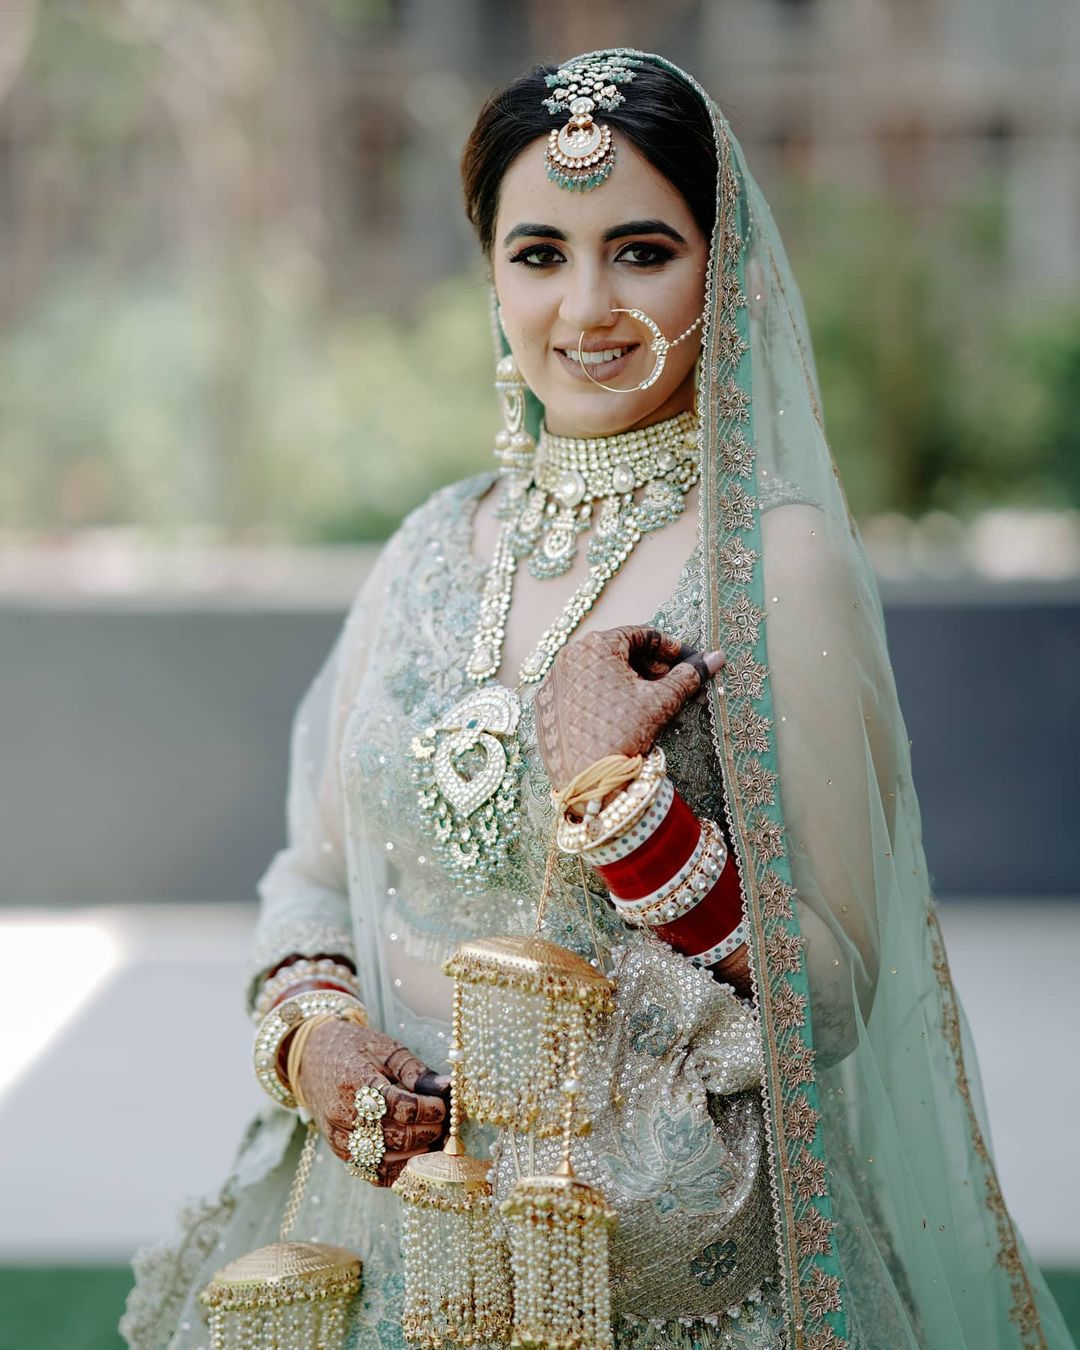 How to Choose the Best Jewellery For Your Lehenga - The Caratlane